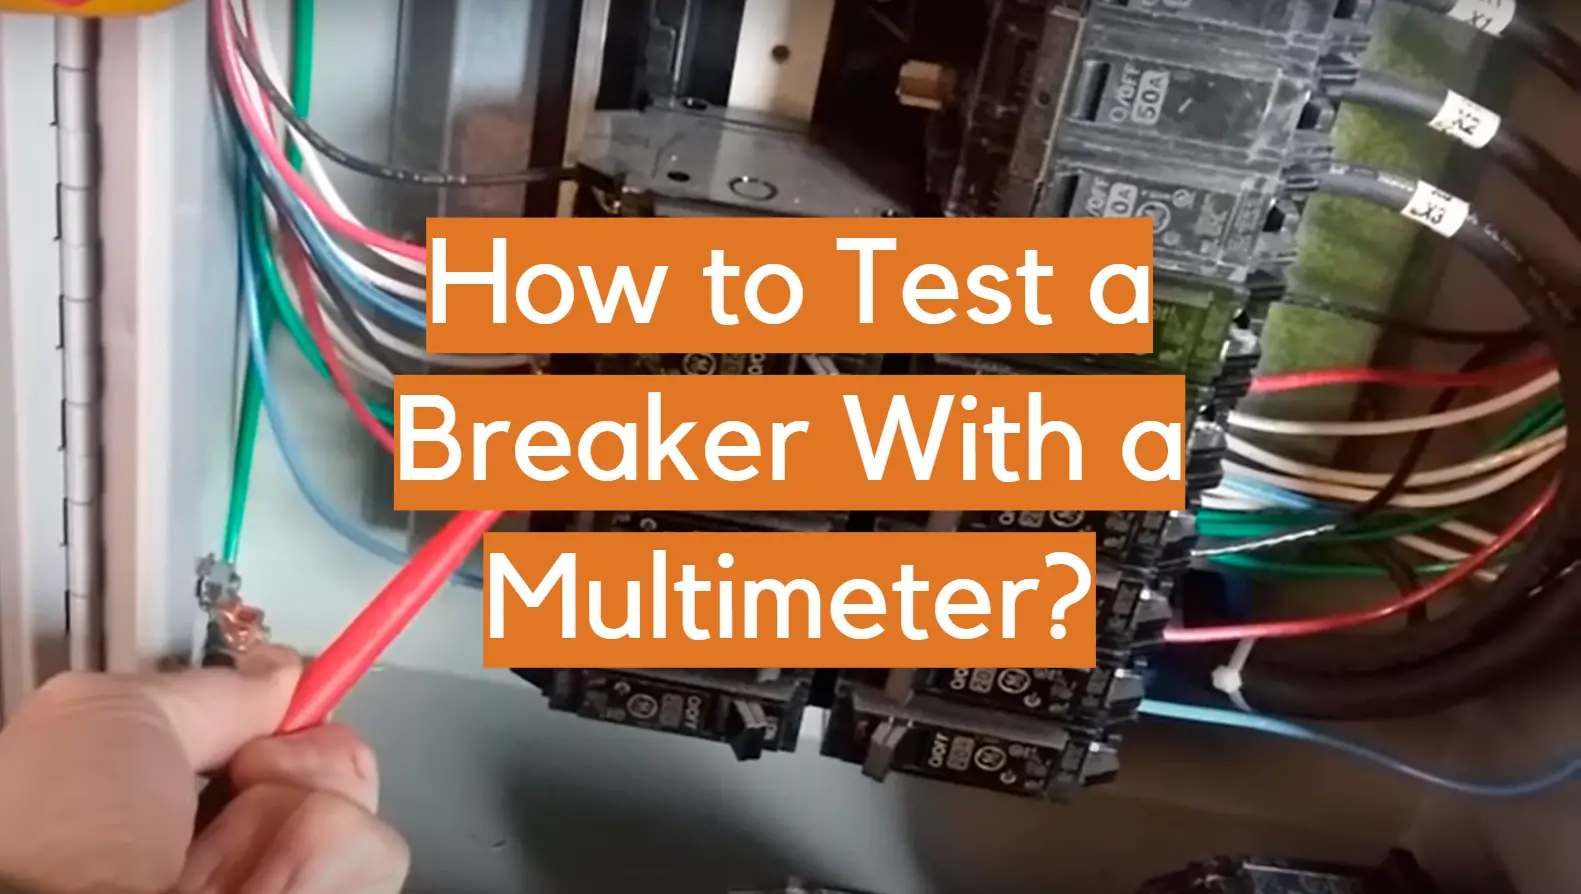 How to Test a Breaker With a Multimeter?